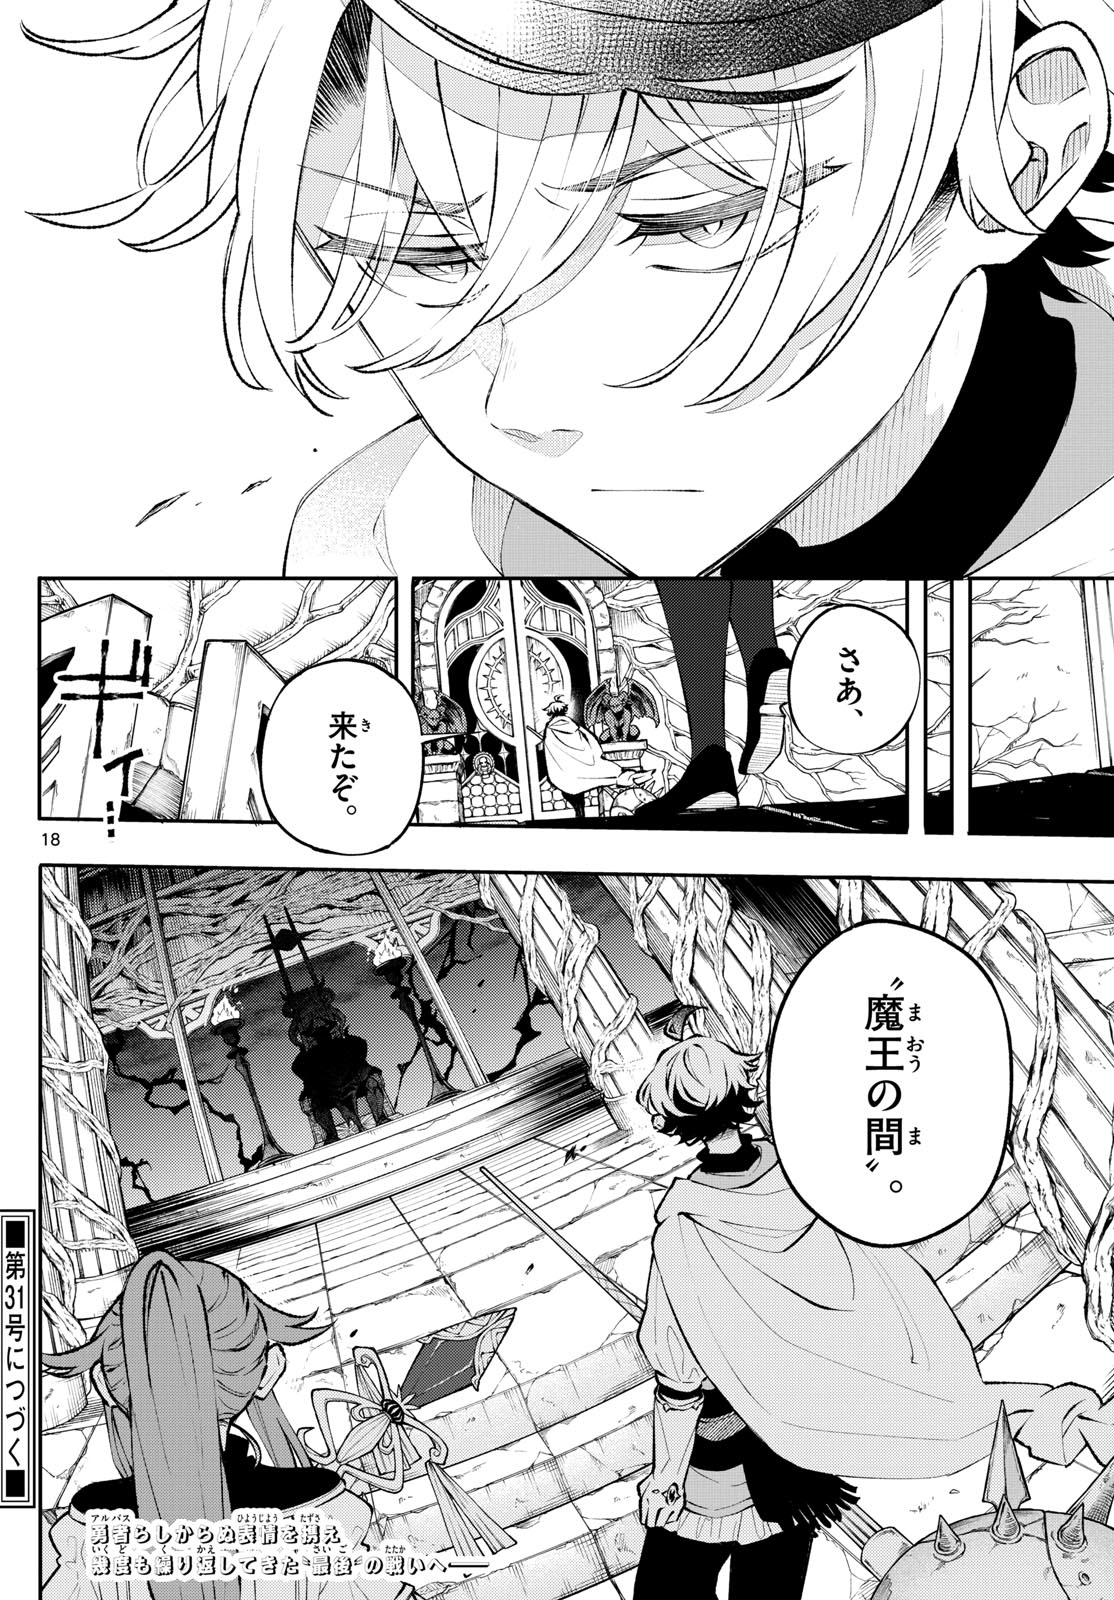 Kaiten no Albus - Chapter 6 - Page 18